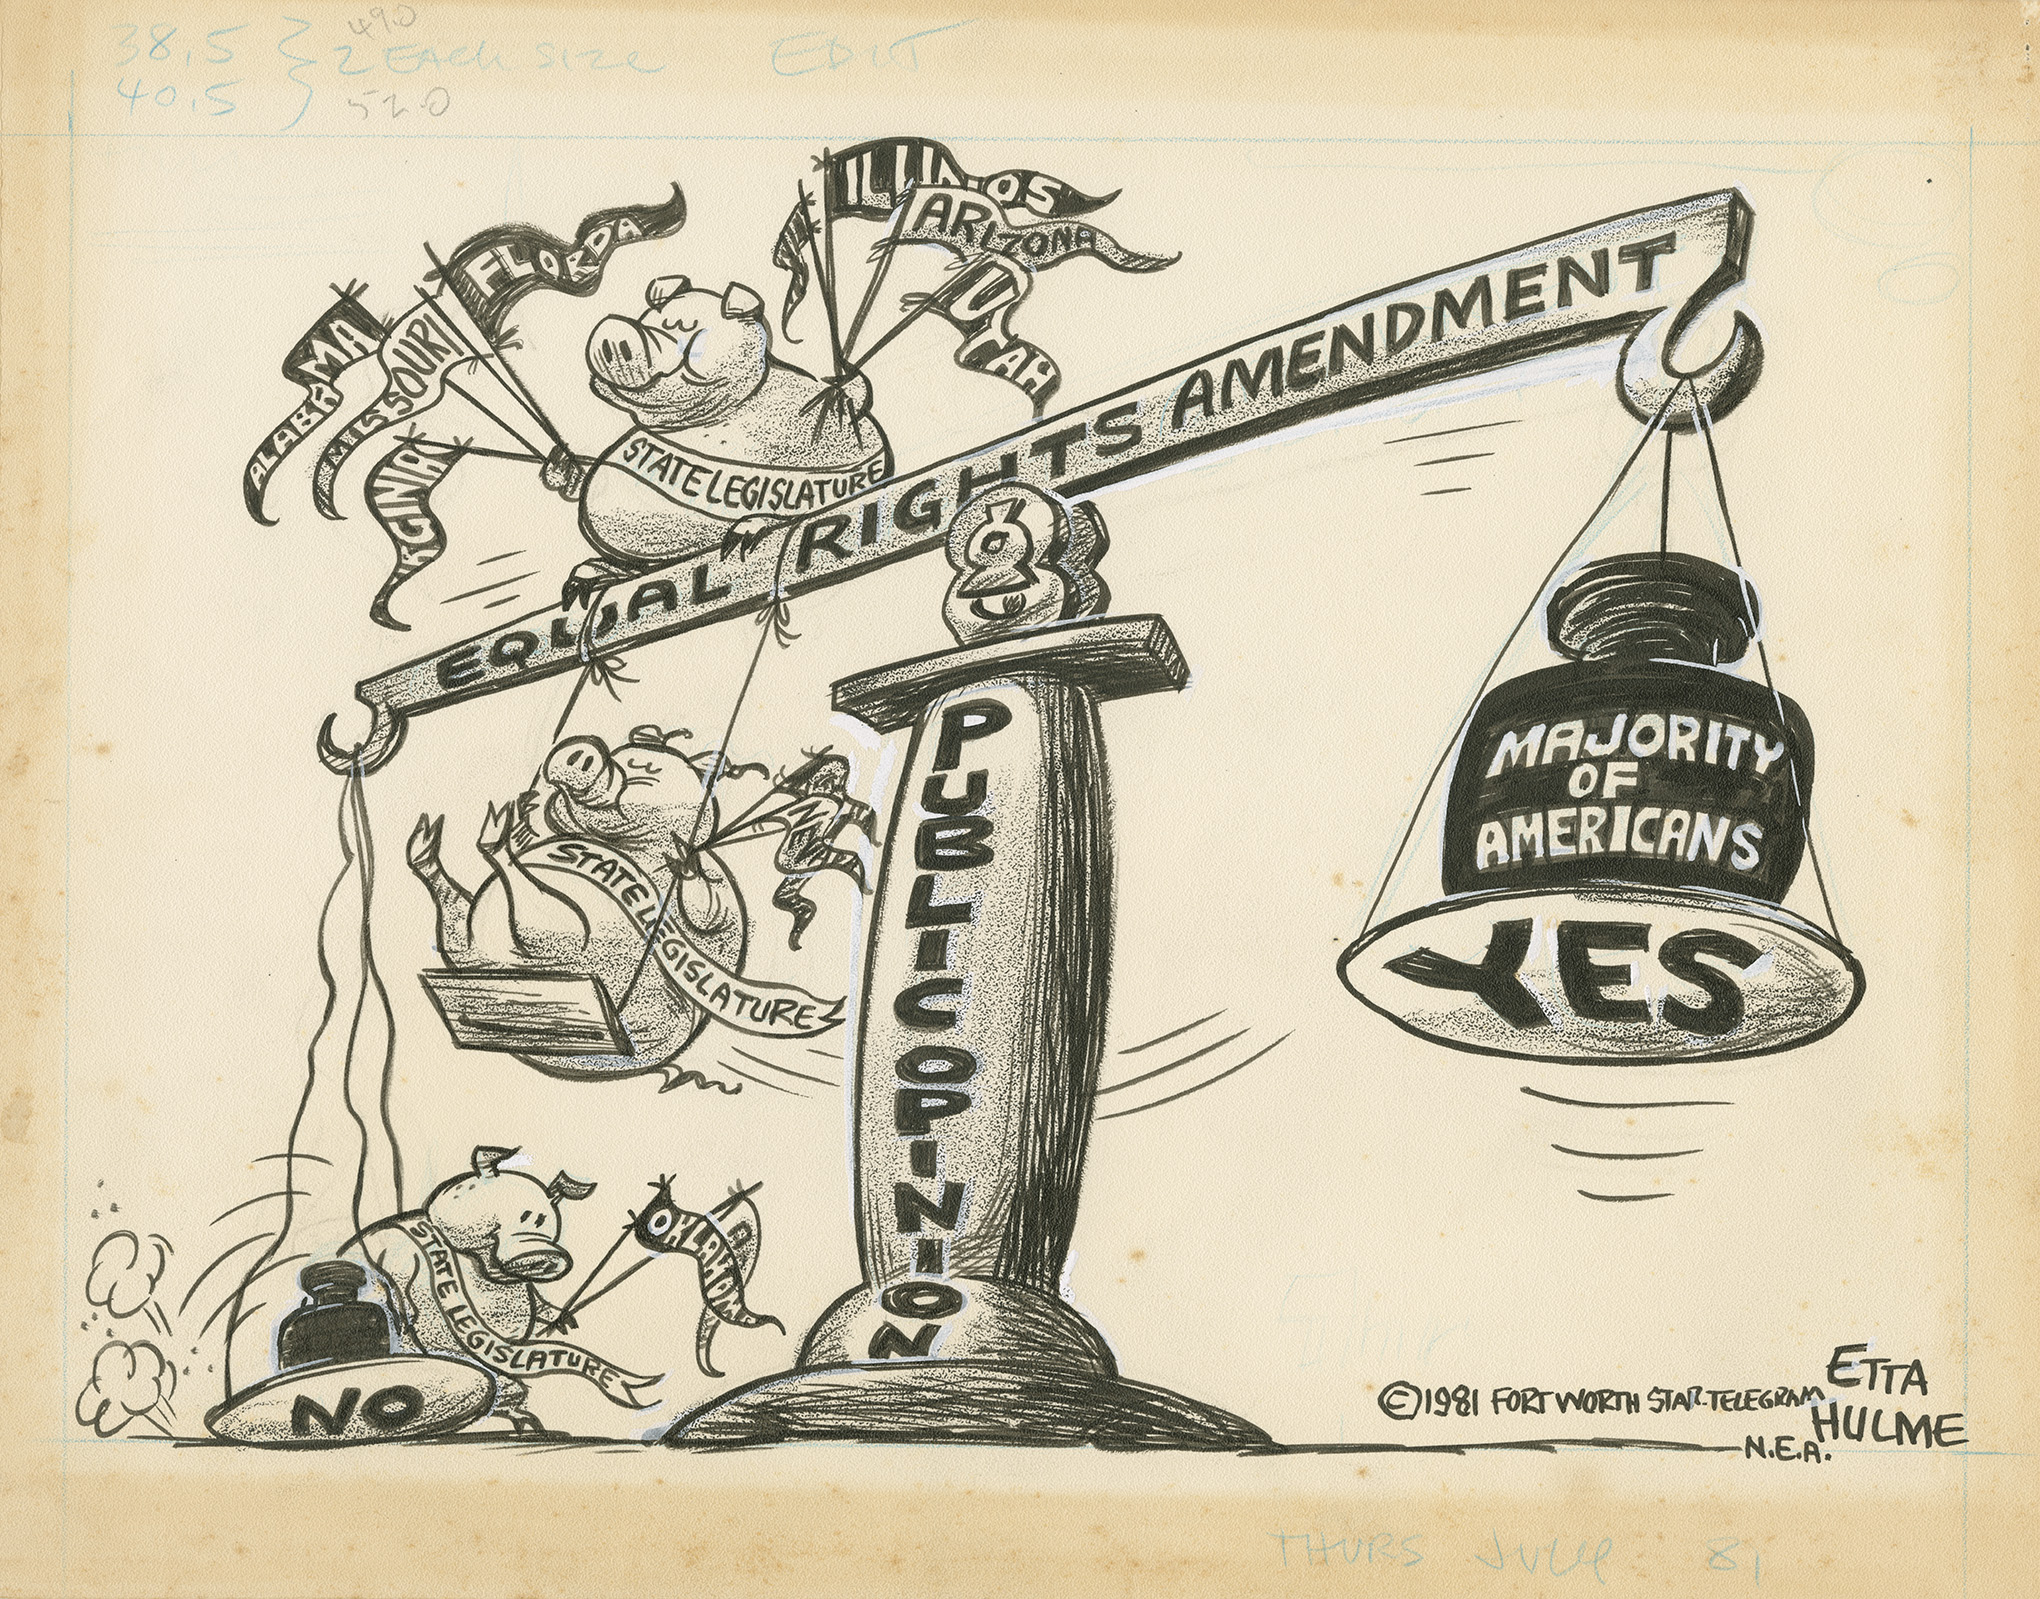 Political cartoon by Etta Hulme. This cartoon depicts a scale which reads, "Equal Rights Amendment" across the top, a large weight for "Majority of Americans" sitting on top of a scale that reads "Yes" is seen at right. A smaller weight on top of a scale that reads "No" has fallen to the ground because of the three little pigs with the label "State Legislature" holding flags for Florida, Alabama, Missouri, Virginia, Illinois, Arizona, Utah, and Oklahoma, contributing to the scale to swinging this way.